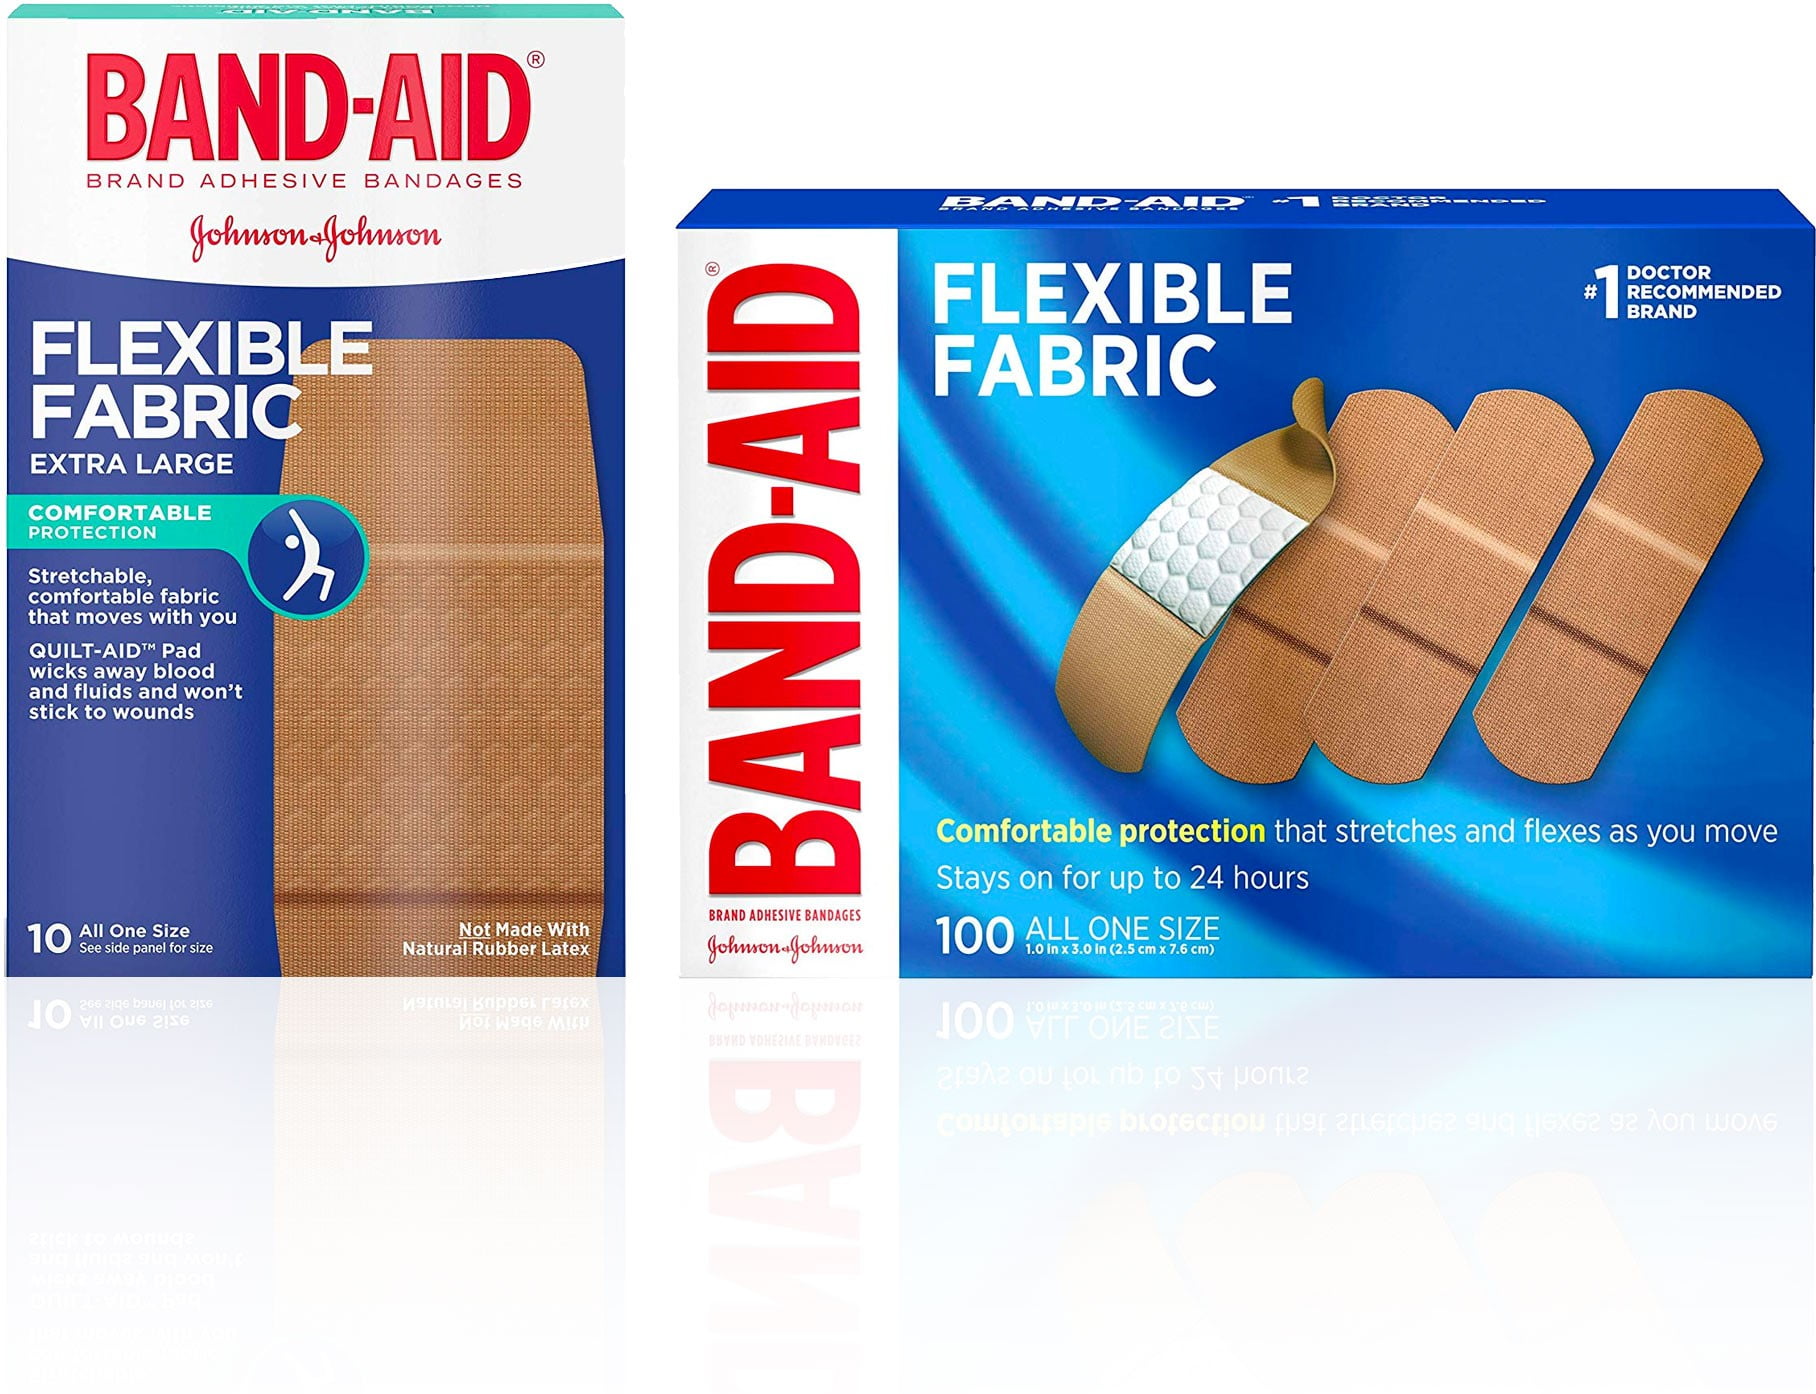 7. "Band-Aid Nail Art: How to Use Band-Aids for Nail Designs" - wide 5